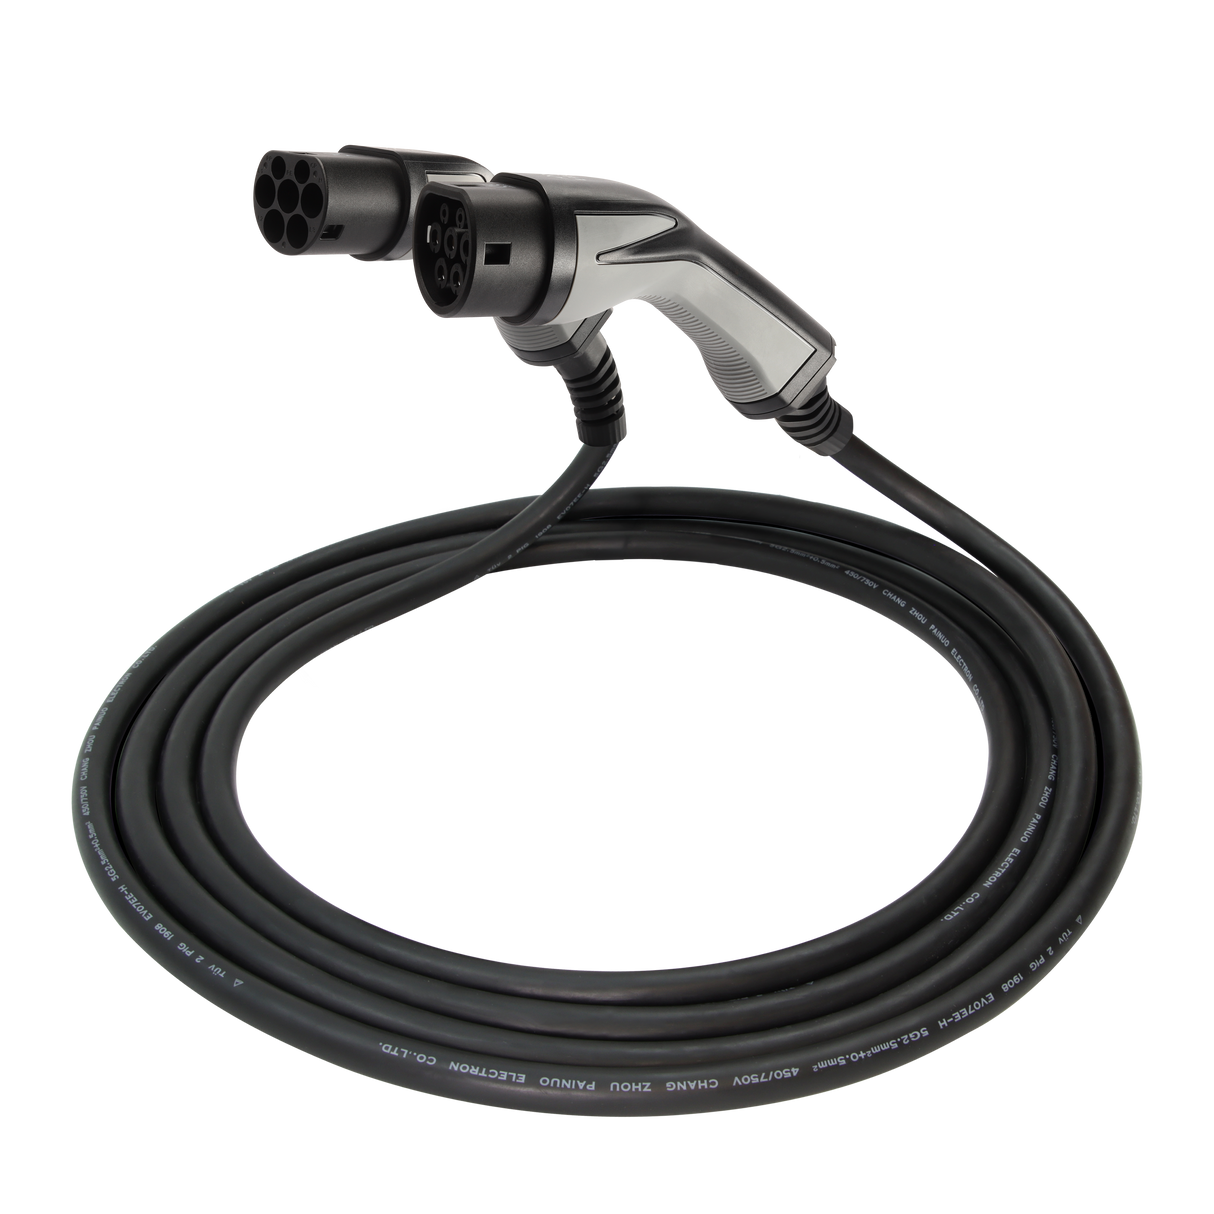 Charging cable Smart #1 - Erock Pro Type 2 - 32A 1 phase (7.4 kW)